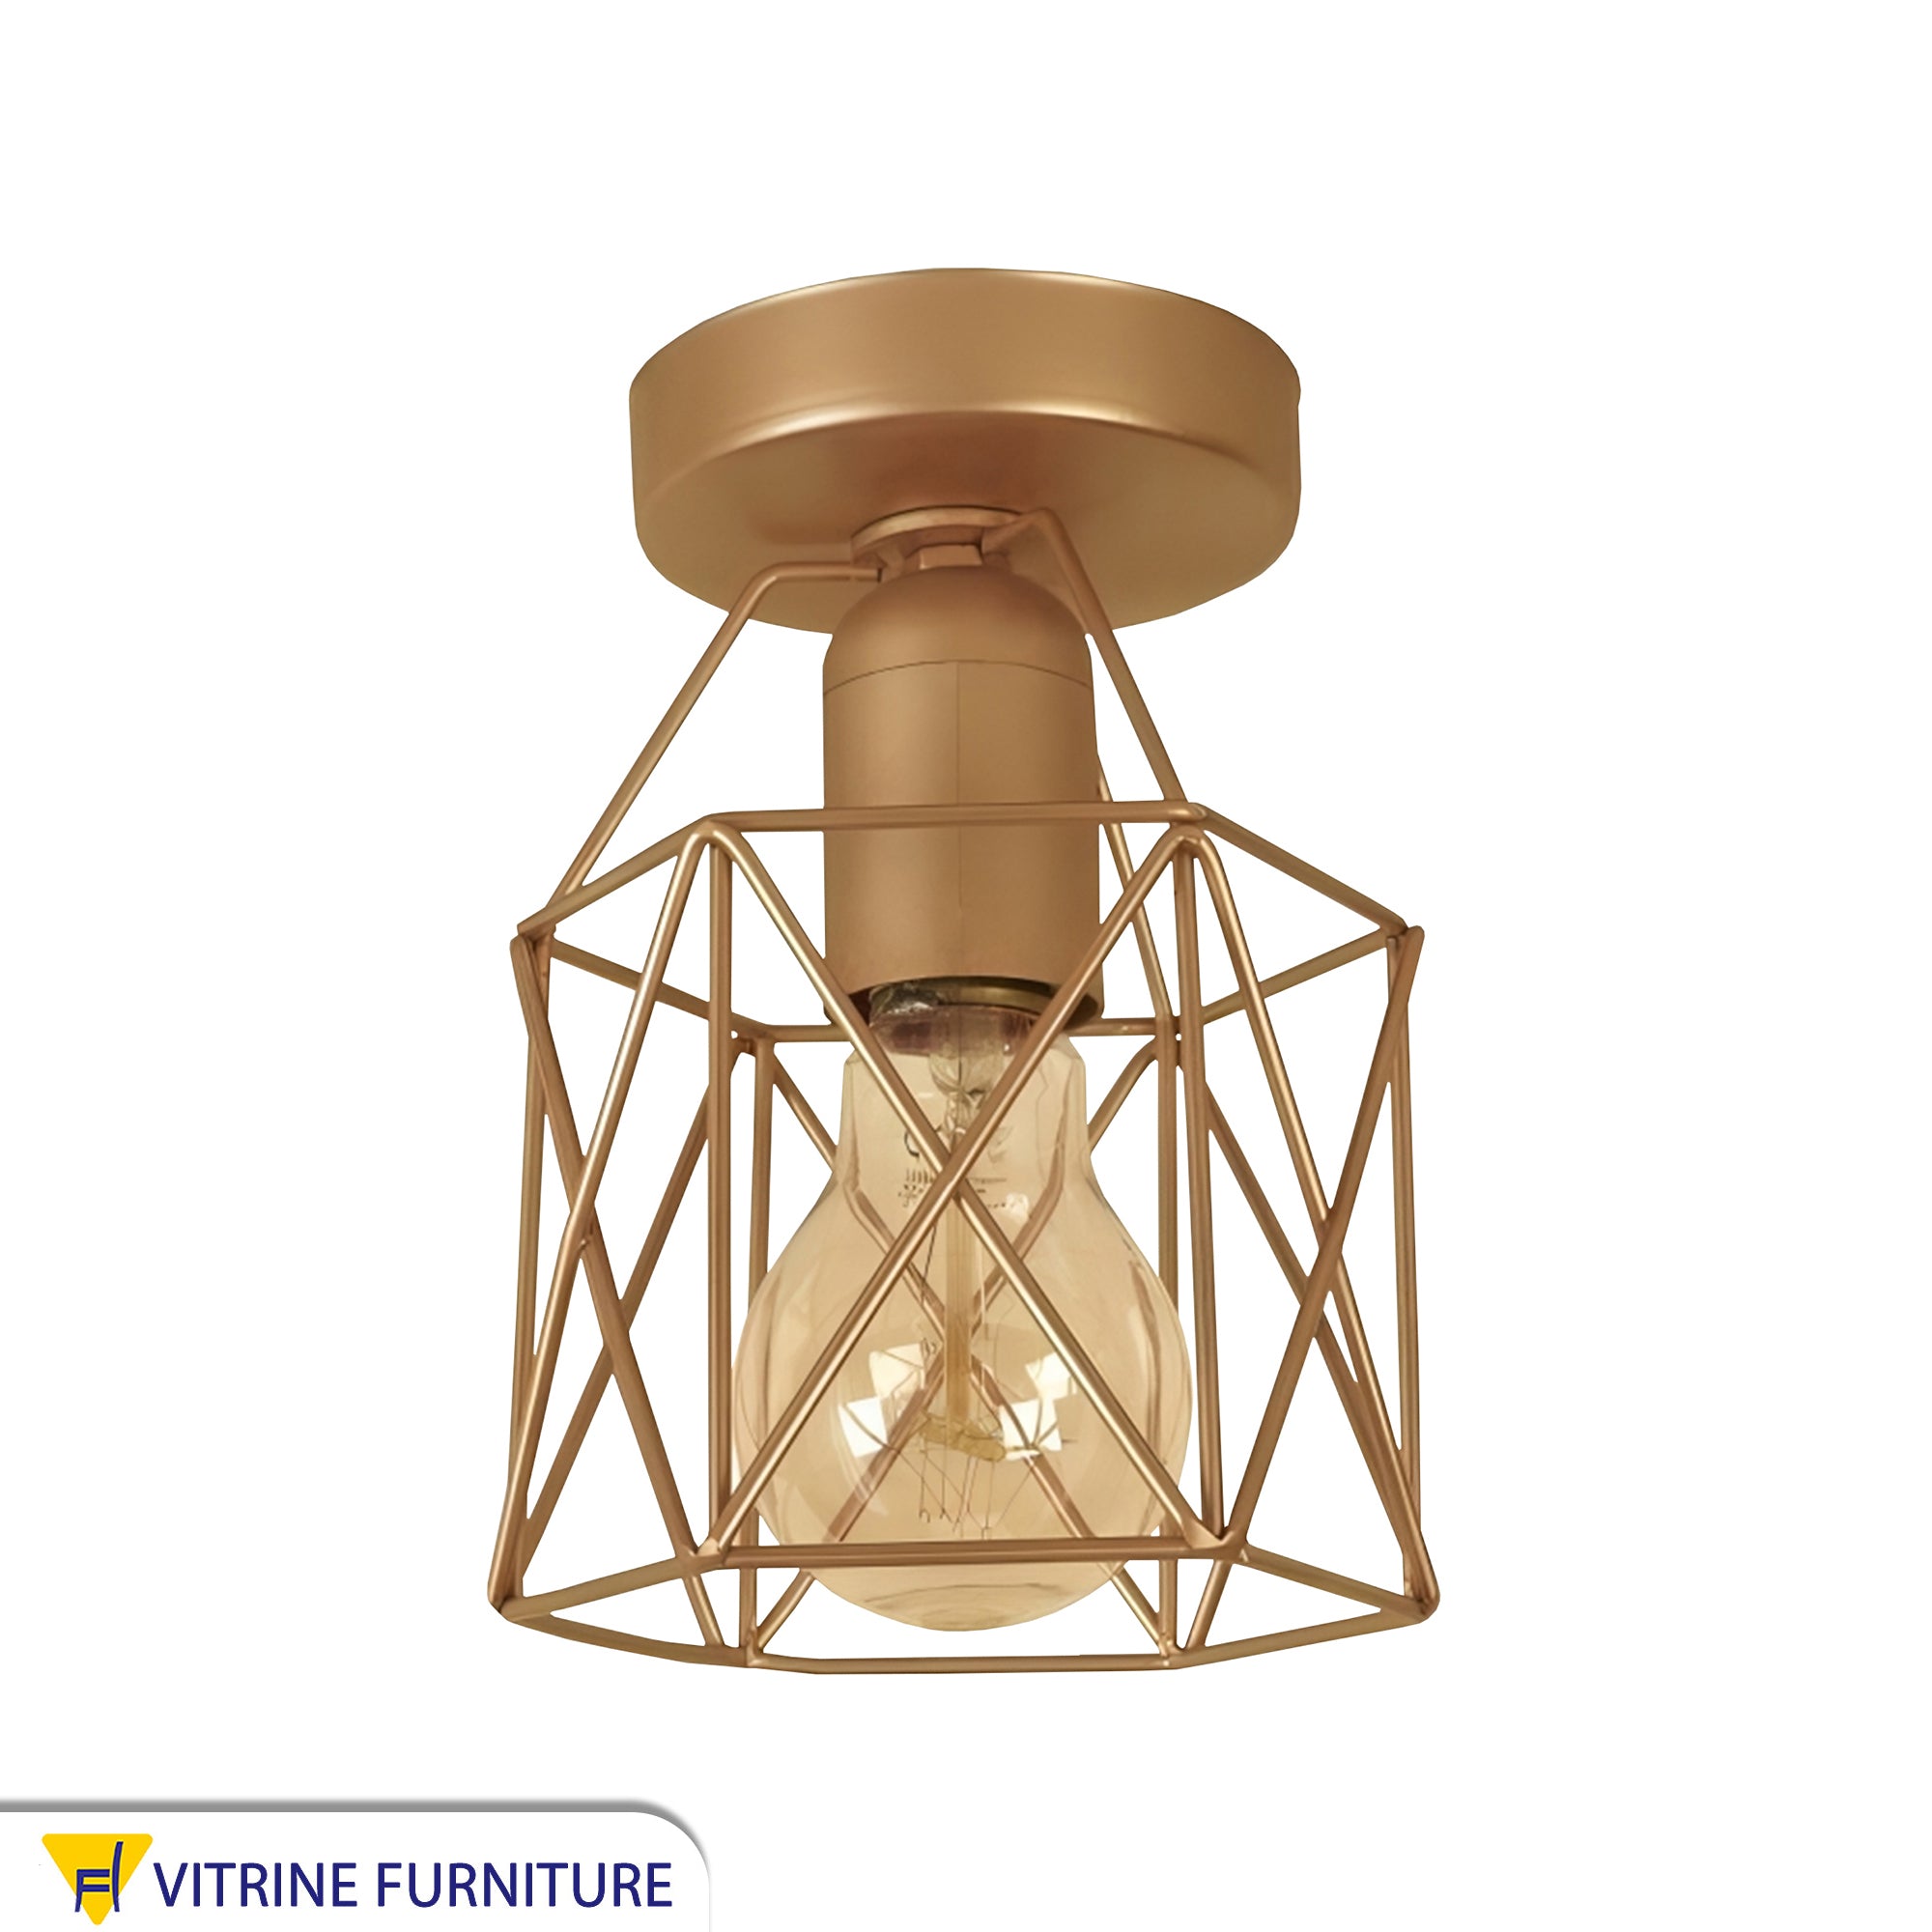 X-cage shaped ceiling lamp